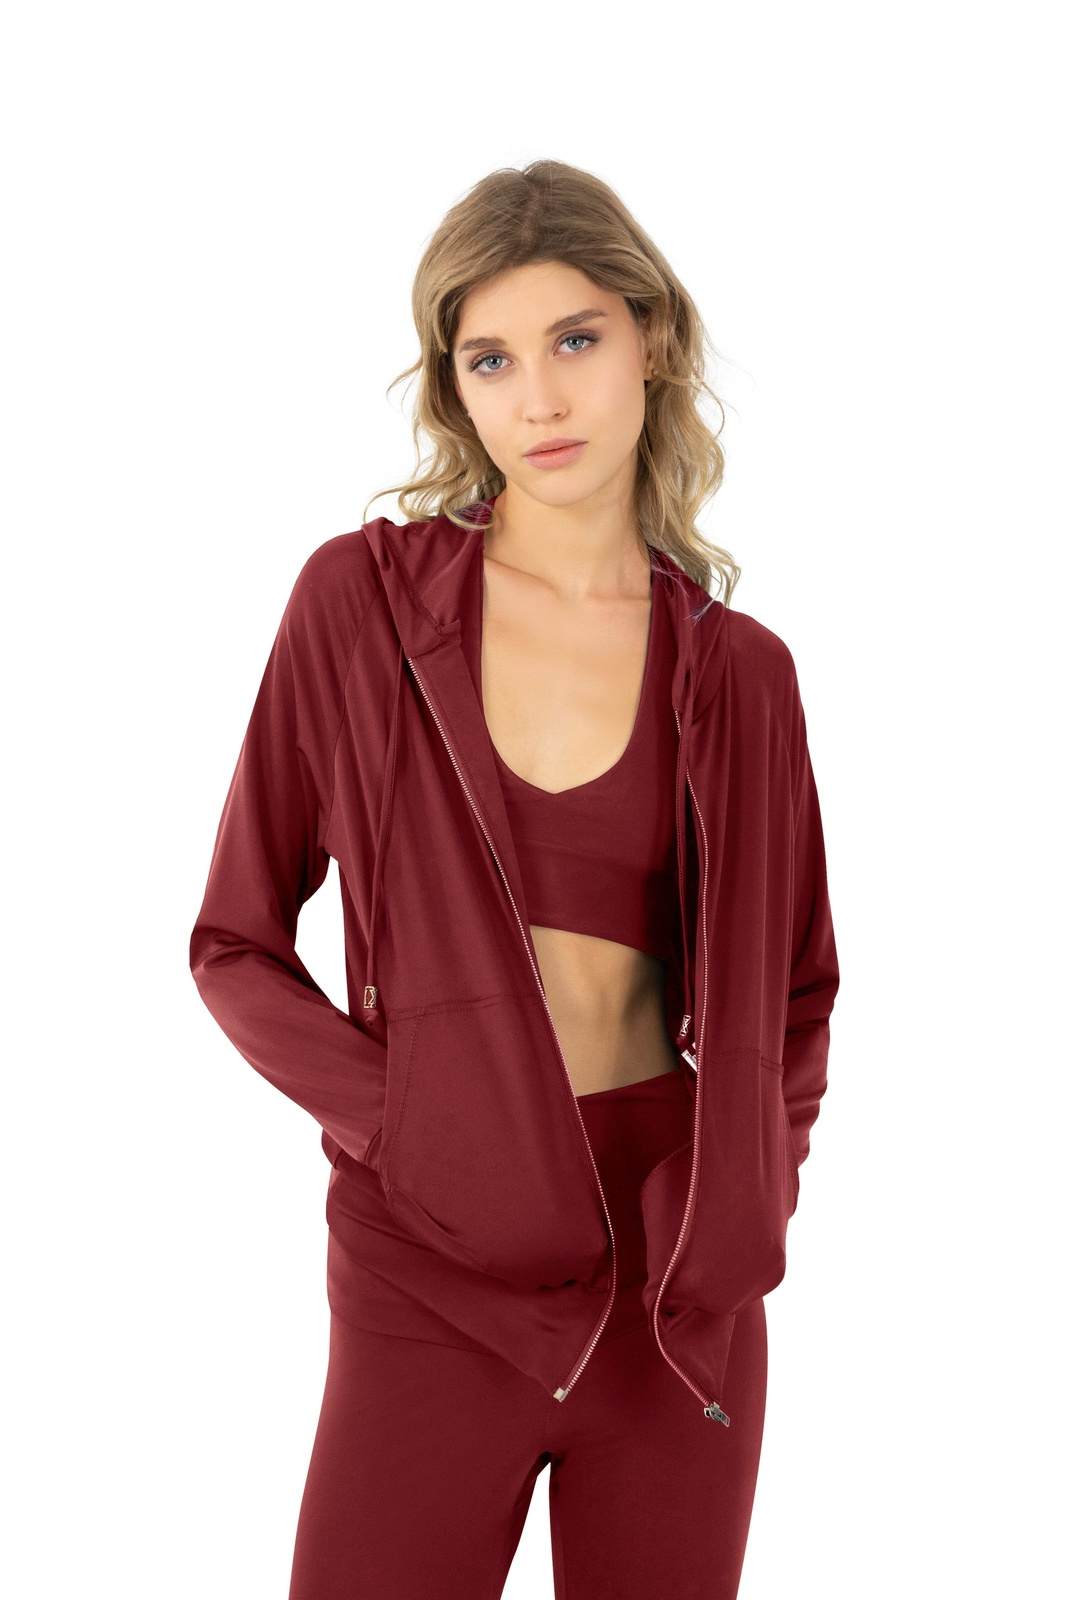 Thin zip up hoodie with matching leggings and bralette crop top in vino dark red made from eco friendly recycled plastic fabric by Ekoluxe, a sustainable loungewear brand